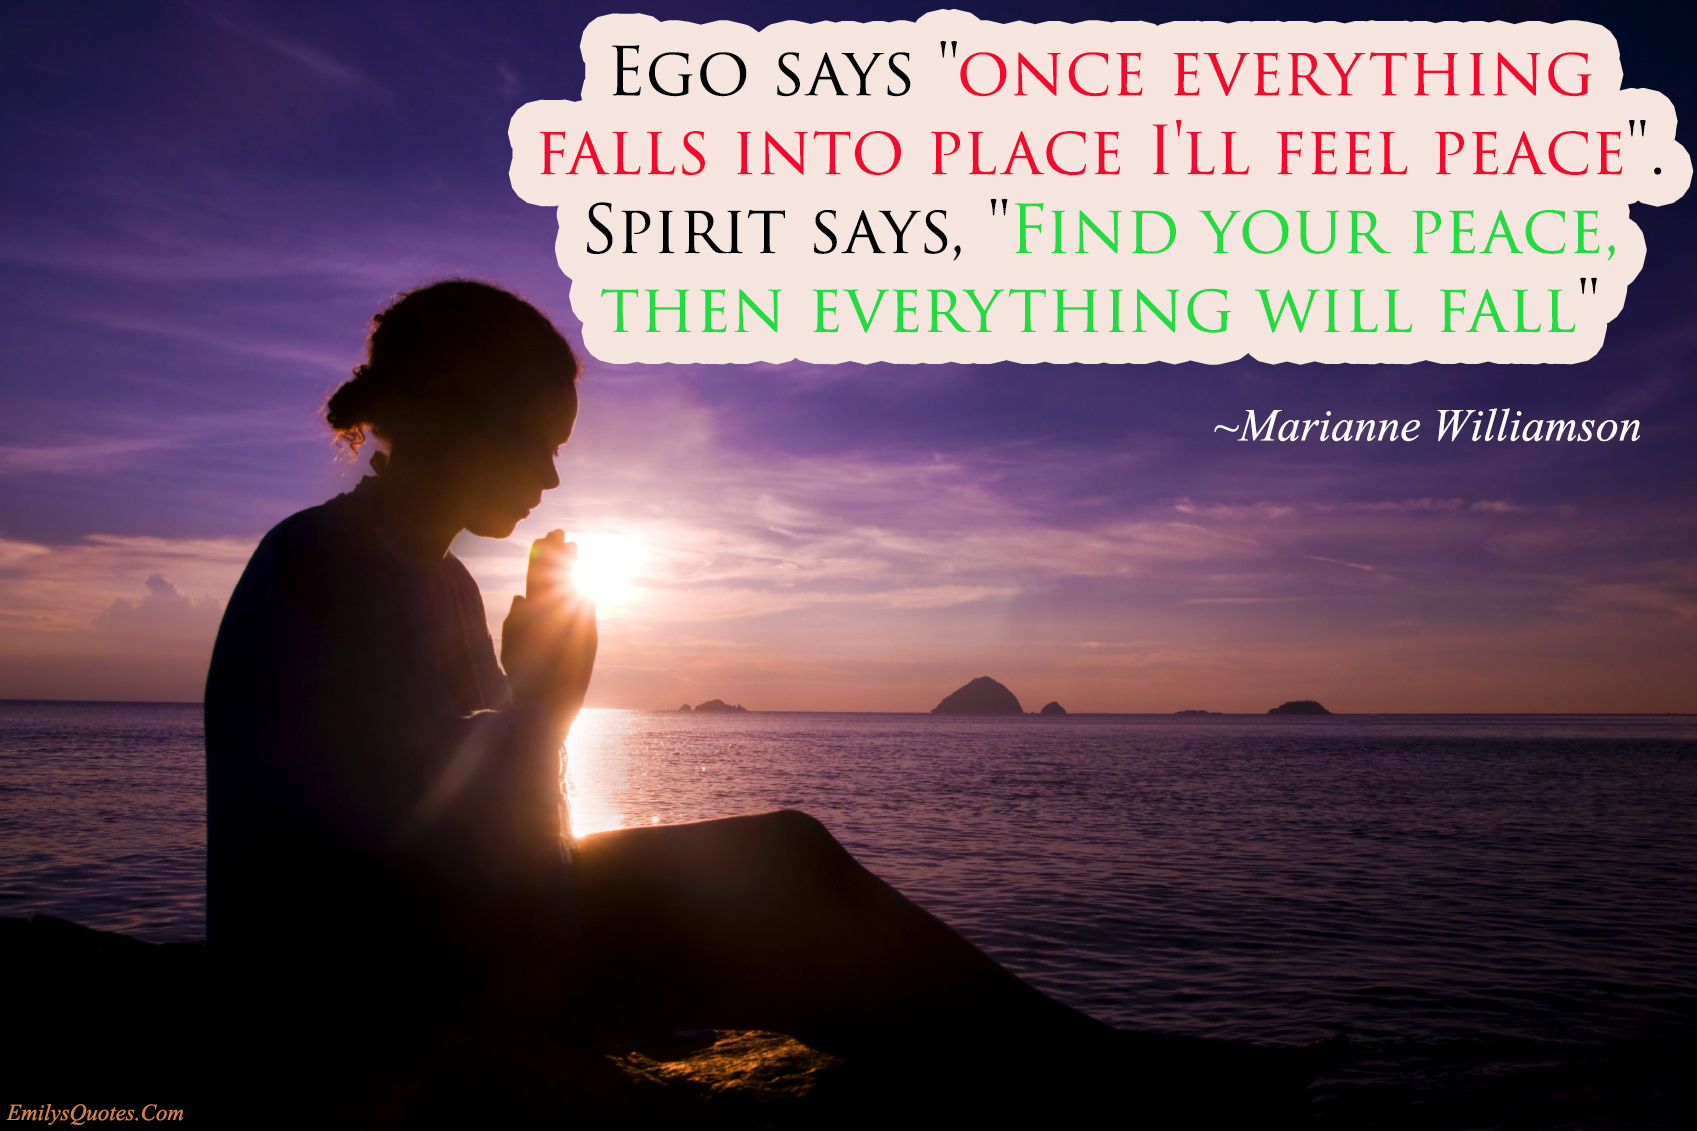 Ego says “once everything falls into place I’ll feel peace”. Spirit